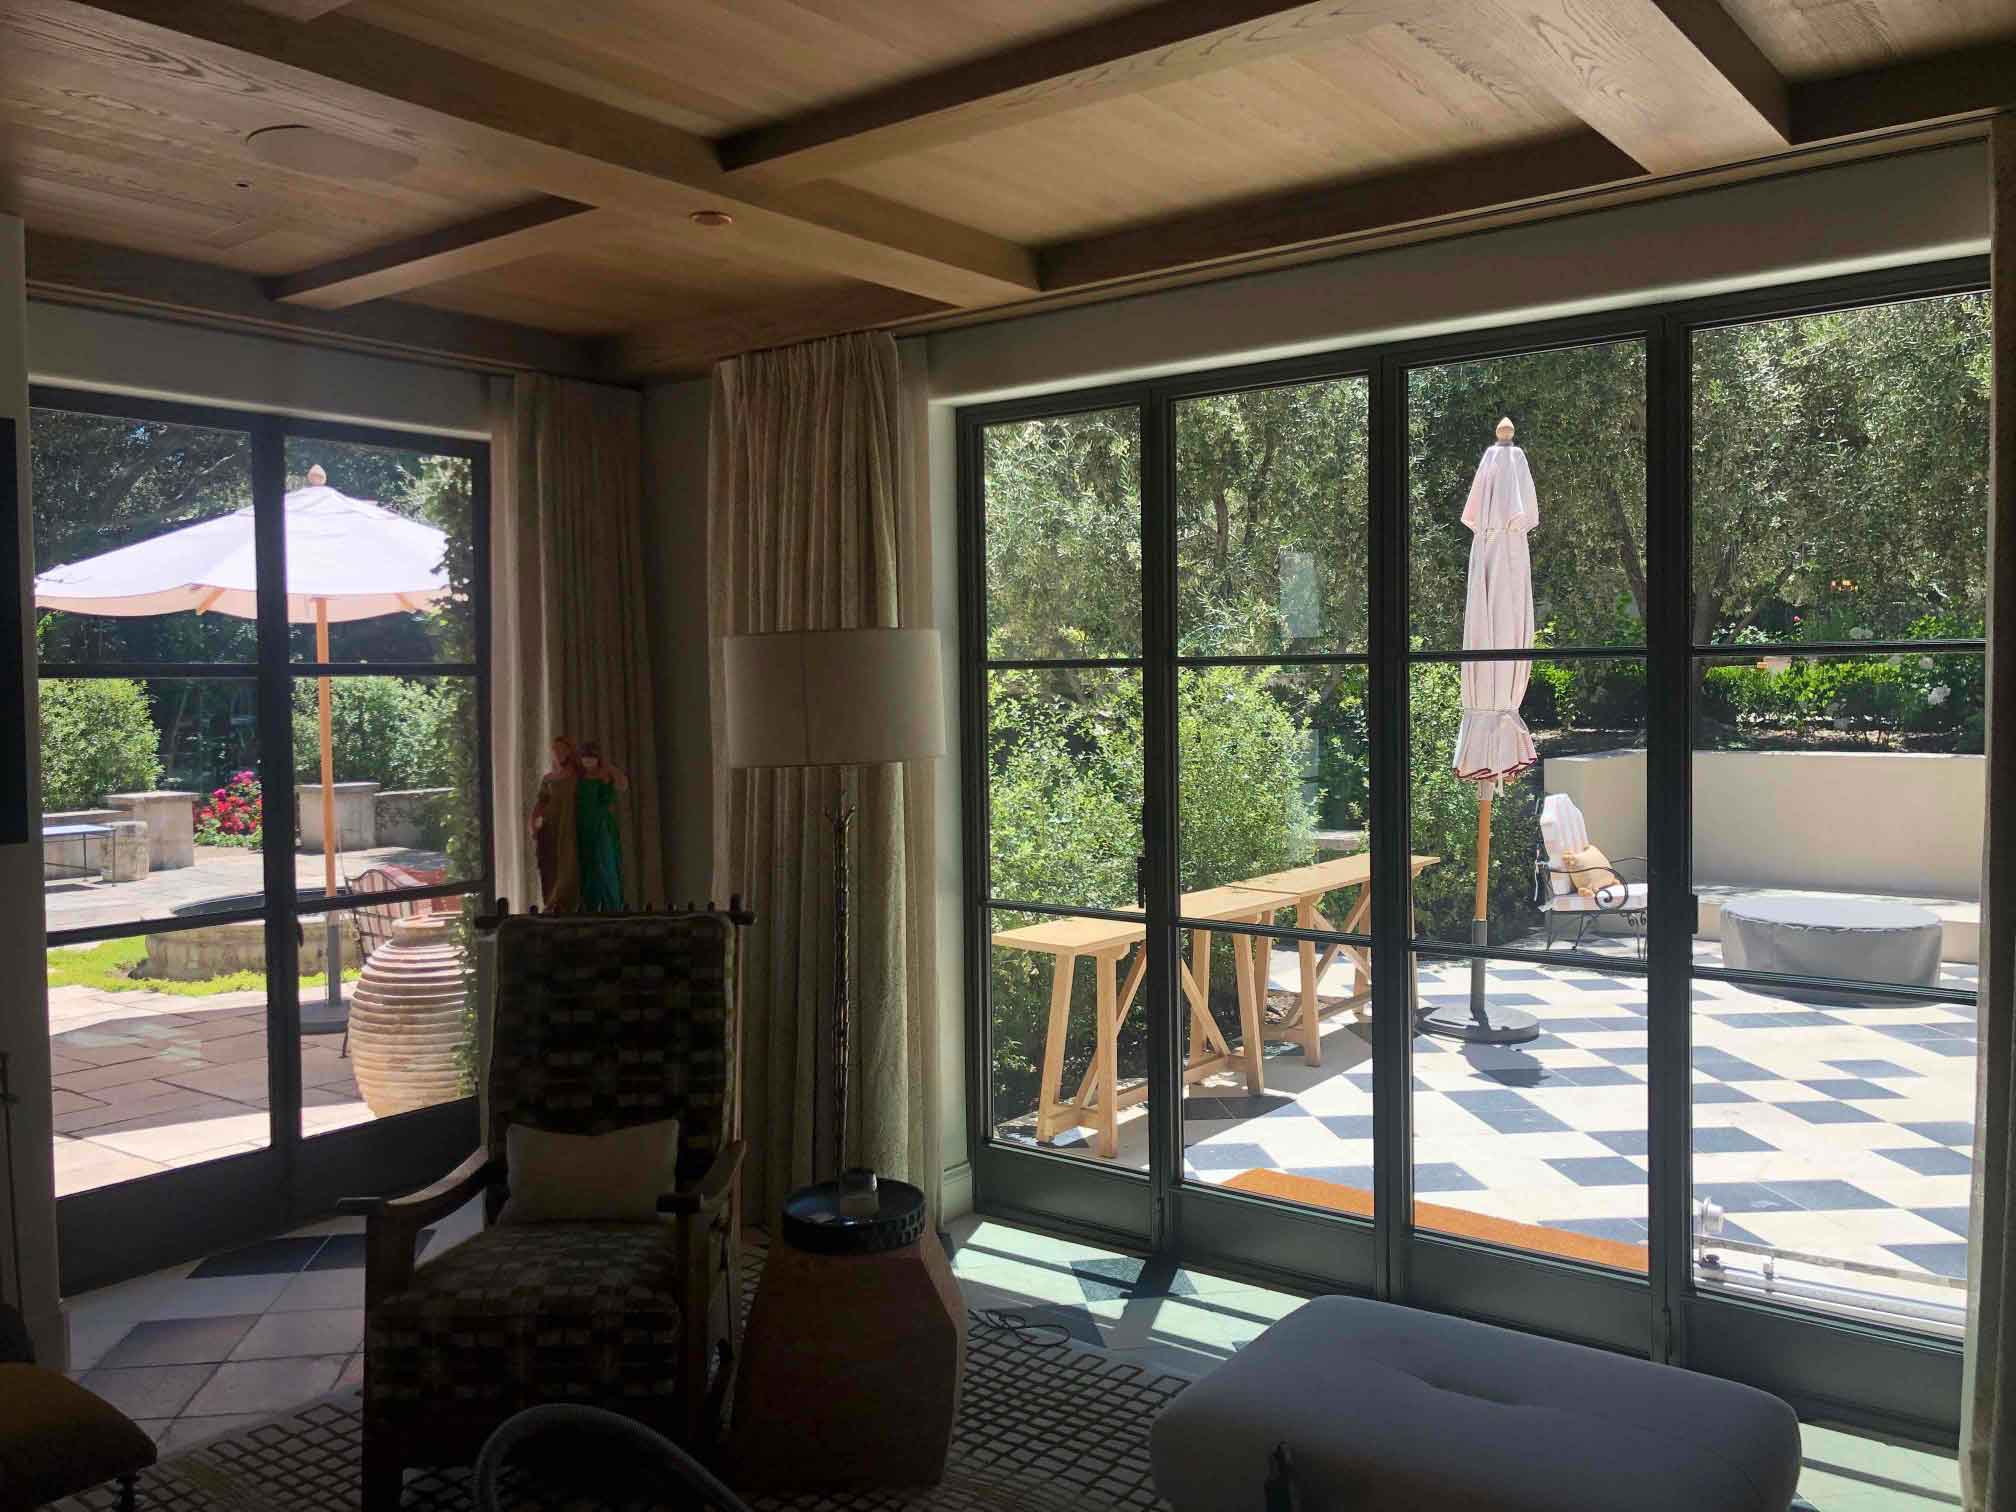 ClimatePro installed 3M Prestige 70 Sun Control Window Tint in this Woodside, CA Home